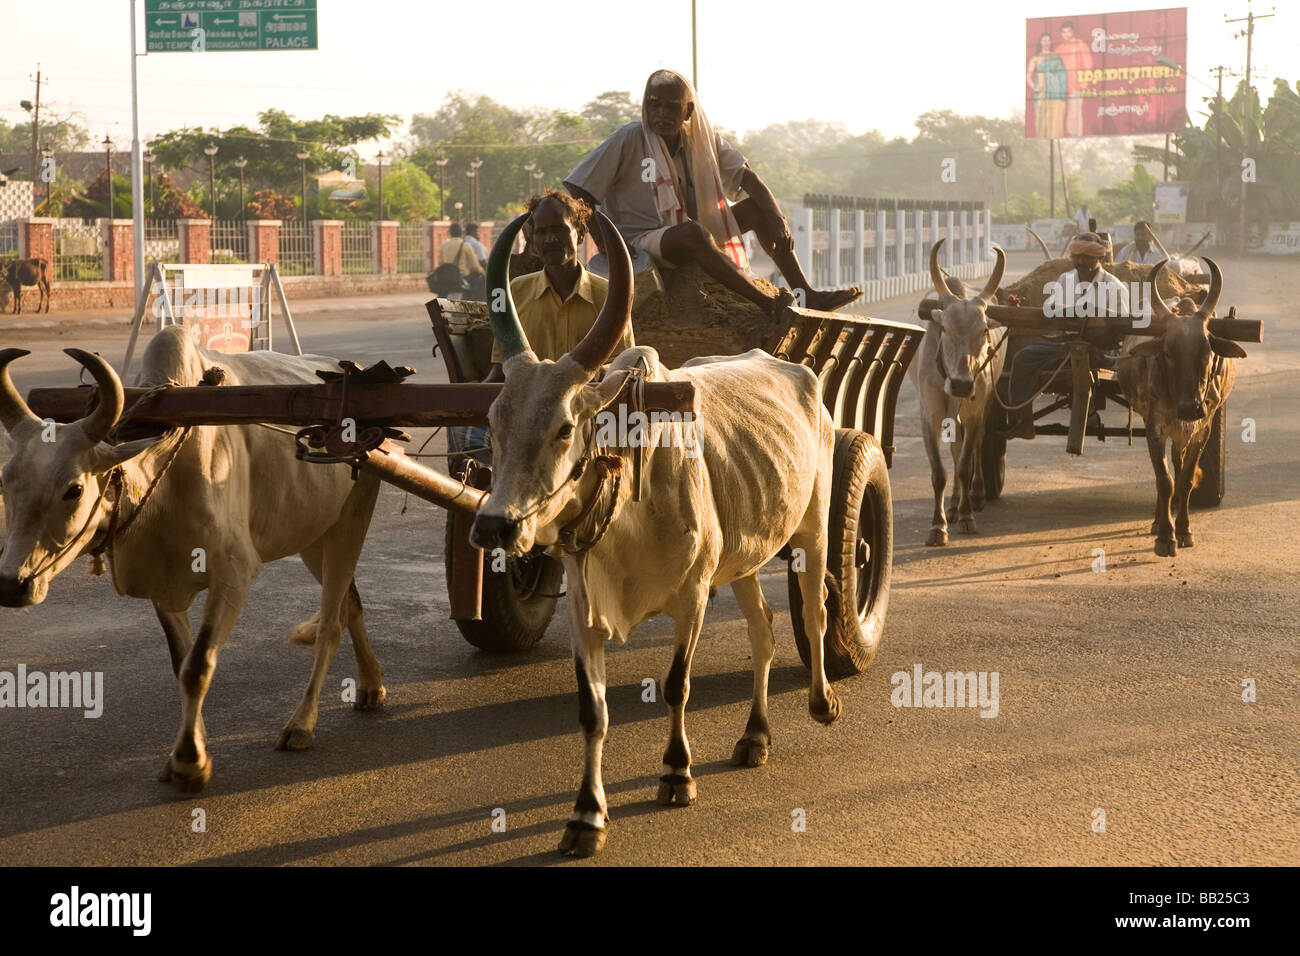 Bullock carts on the street in the small city of Thanjavur in Tamil Nadu, India. Stock Photo